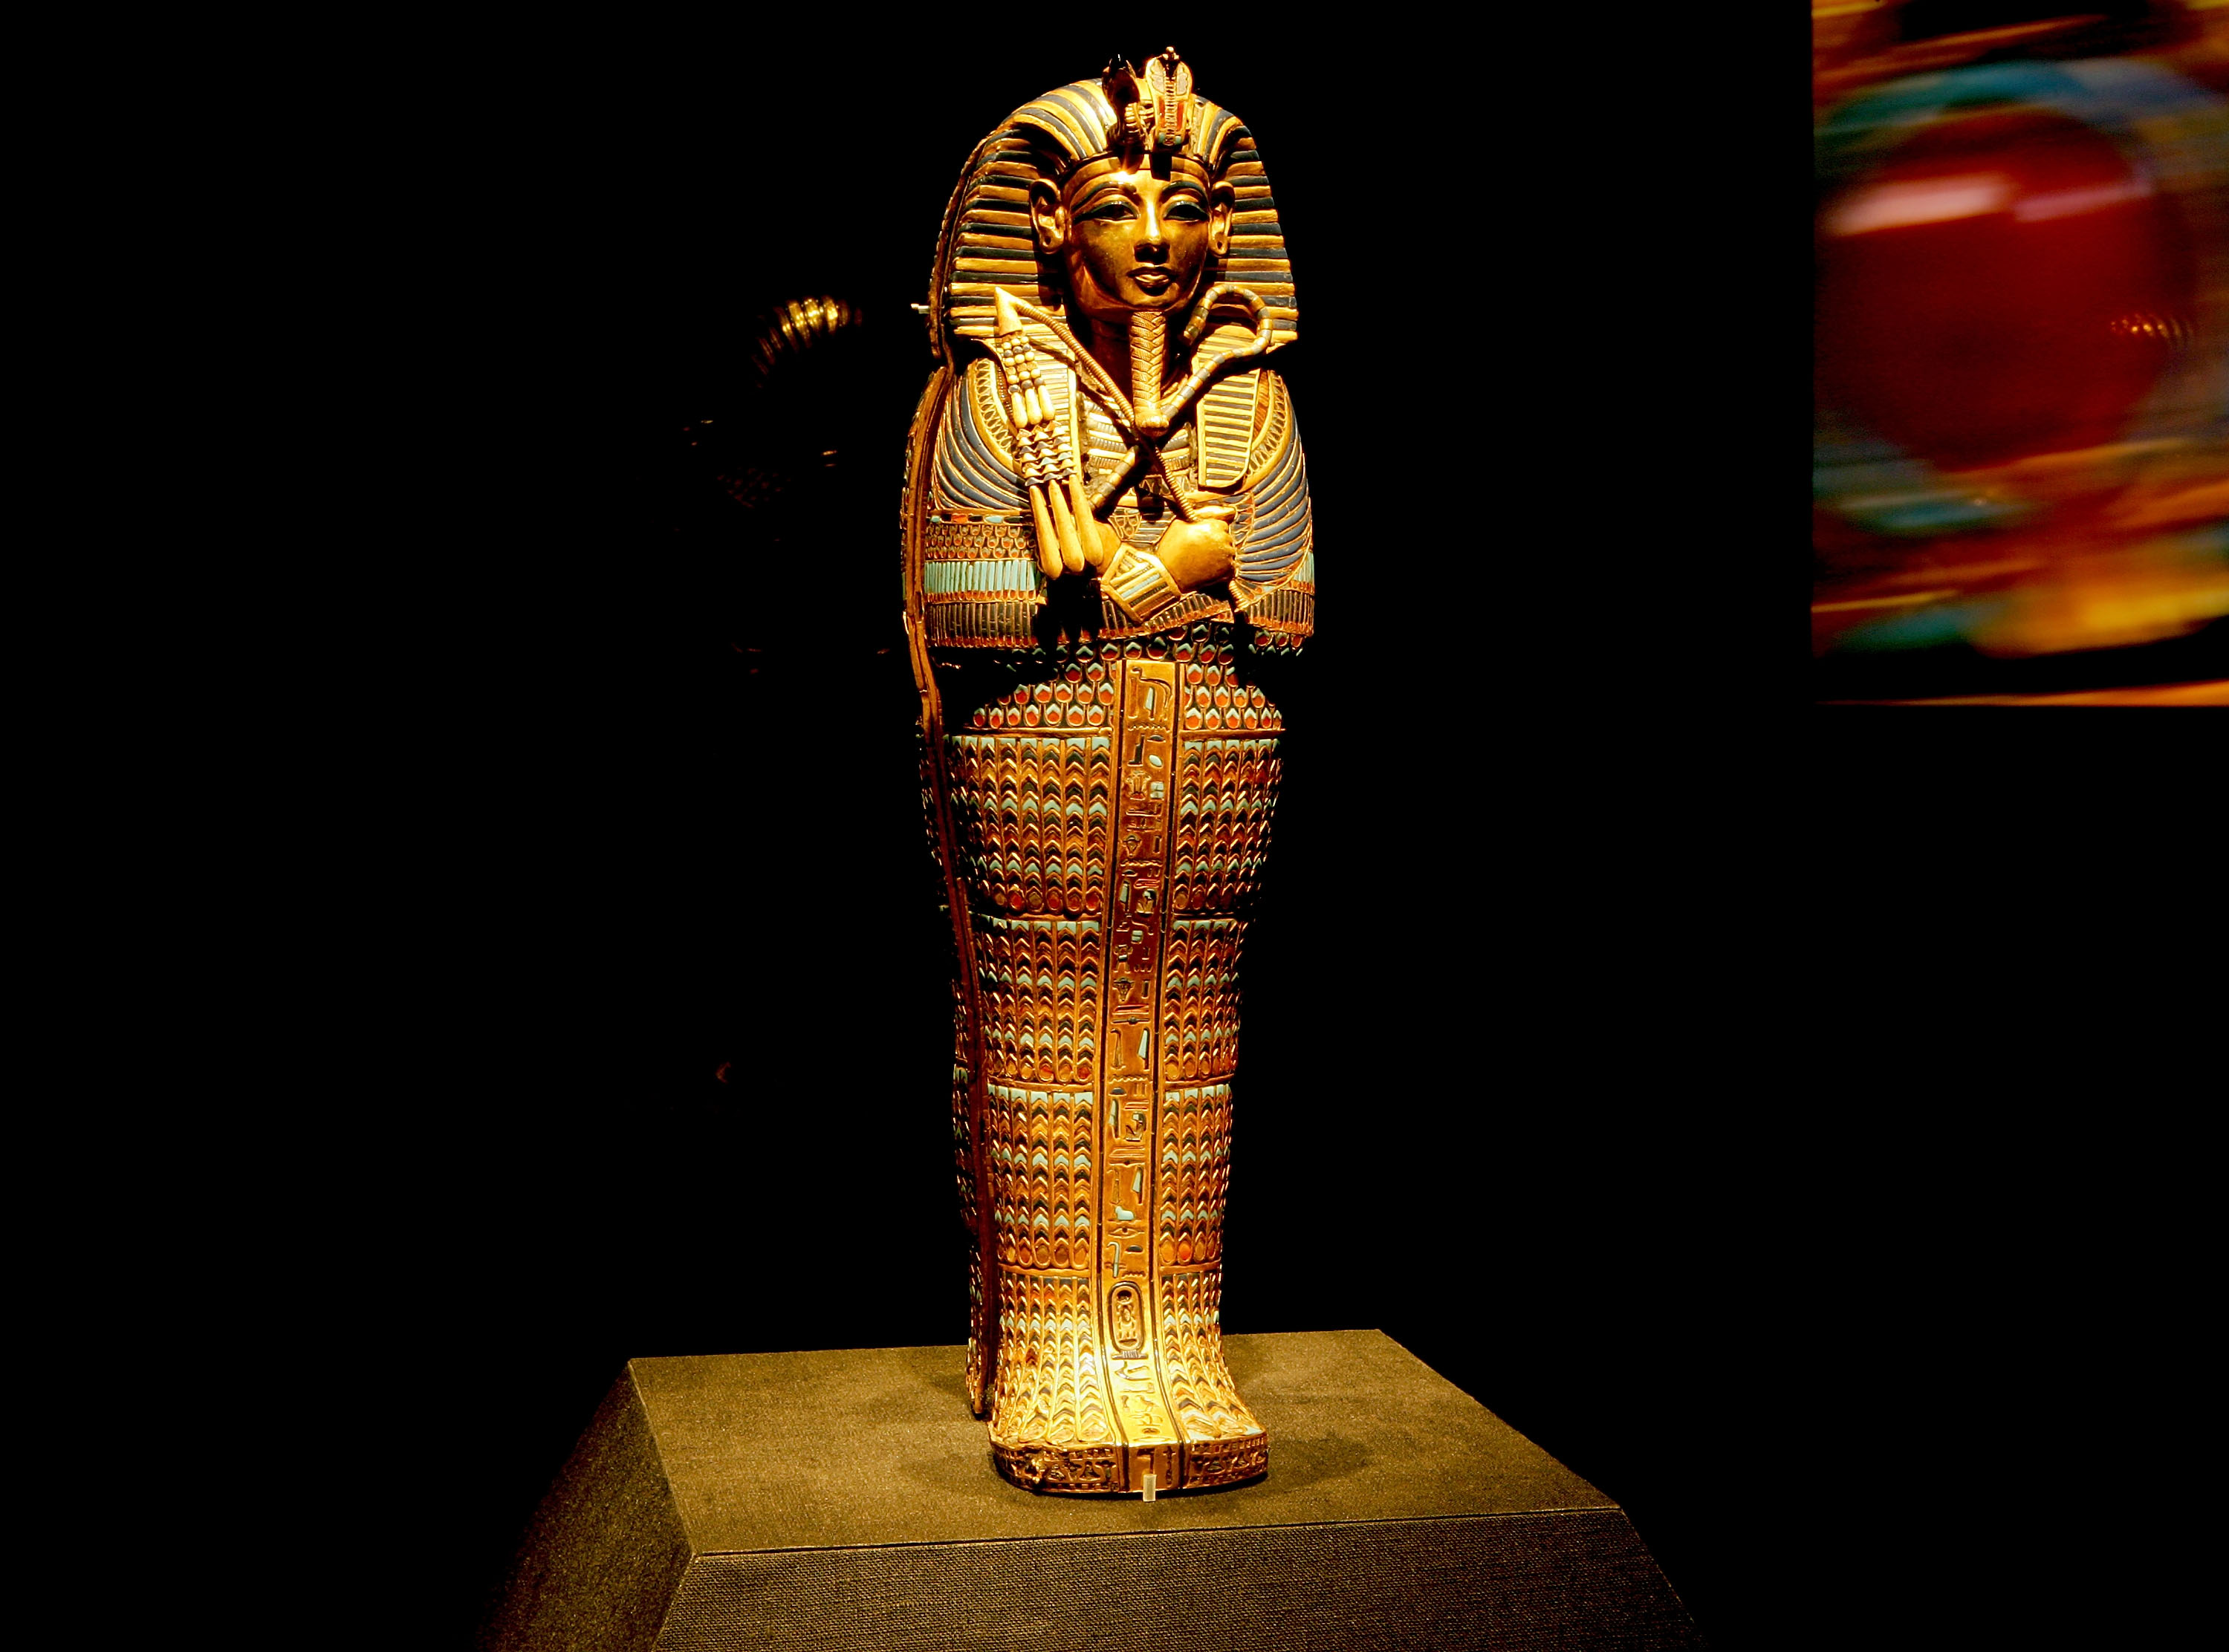 LOS ANGELES, CA - JUNE 15: The Viscera Coffin of Tutankhamun is on display during the "Tutankhamun And The Golden Age Of The Pharaohs" exhibit opening at the Los Angeles County Museum of Art (LACMA) on June 15, 2005 in Los Angeles, California. Tutankhamun possessed four miniature coffins fashioned of gold and inlaid with colored glass and semi-precious stones, and each stood in a separate compartment in an alabaster chest. (Photo by Ethan Miller/Getty Images)